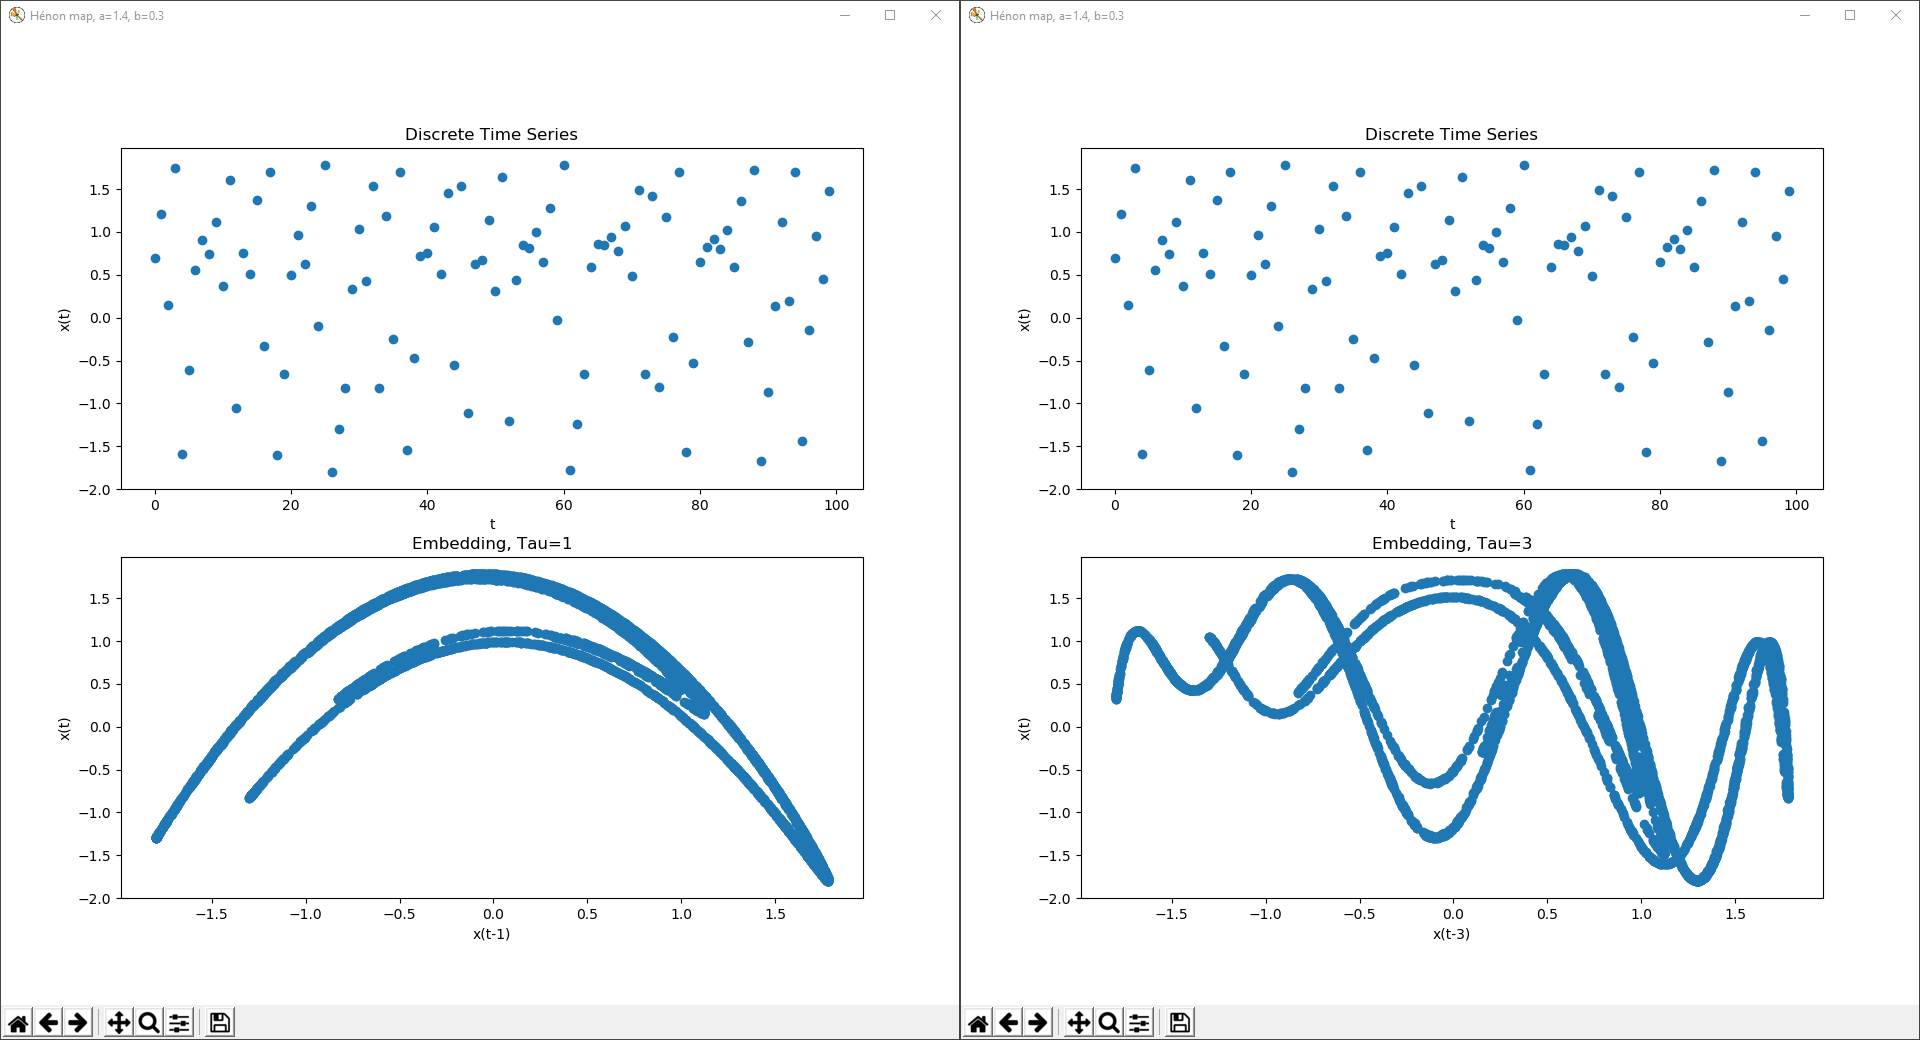 Hénon Map, a=1.4, b=0.3, Time Series and Delay Coordinate Embedding at Tau=1 and Tau=3